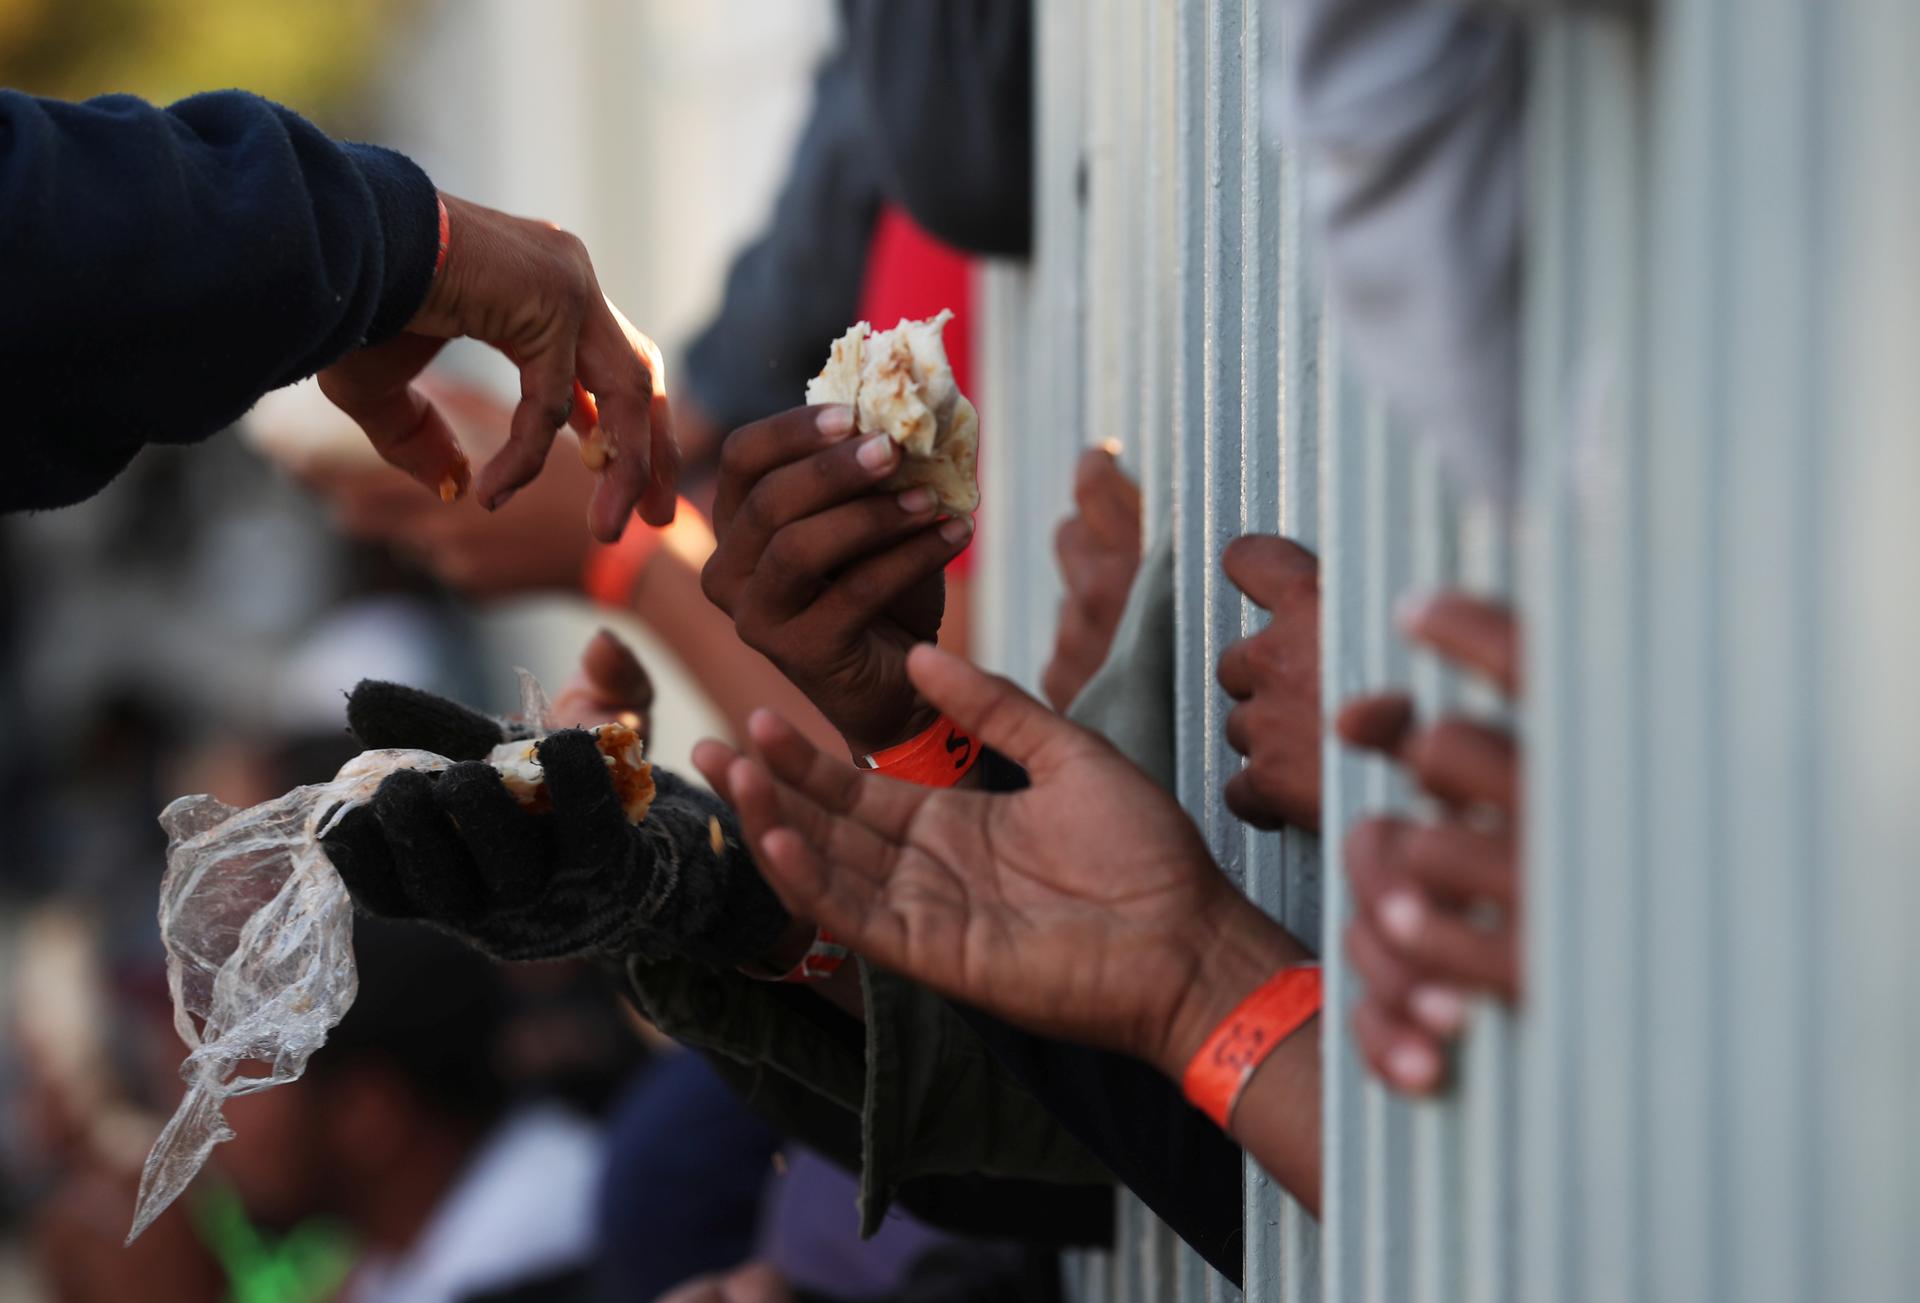 migrants reach through a fence with pieces of food